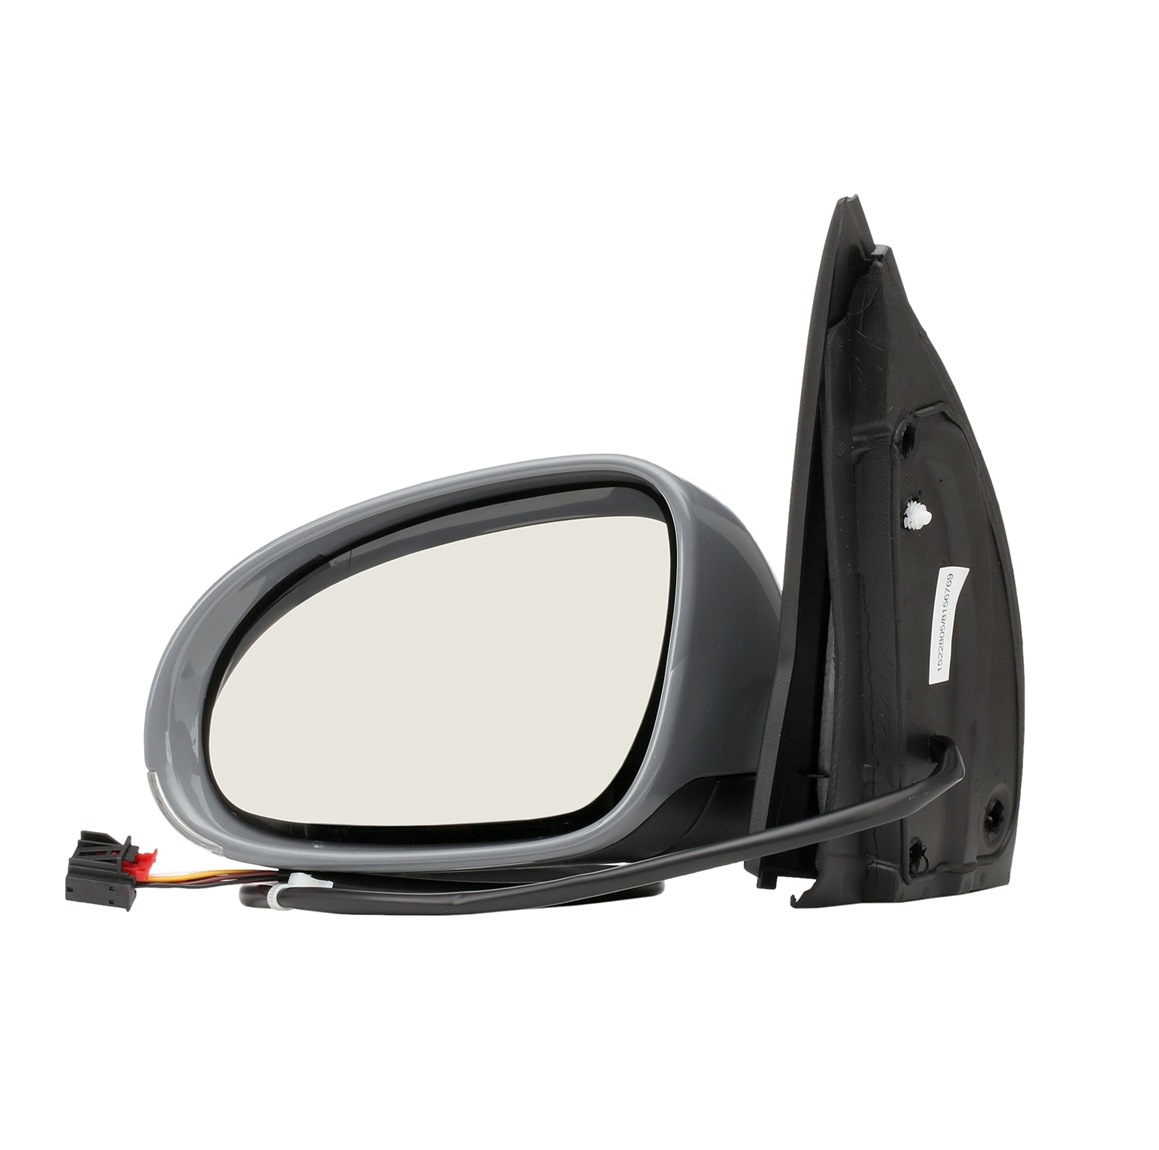 RIDEX 50O0035 Wing mirror Left, Electric, Heated, Complete Mirror, Aspherical, for left-hand drive vehicles